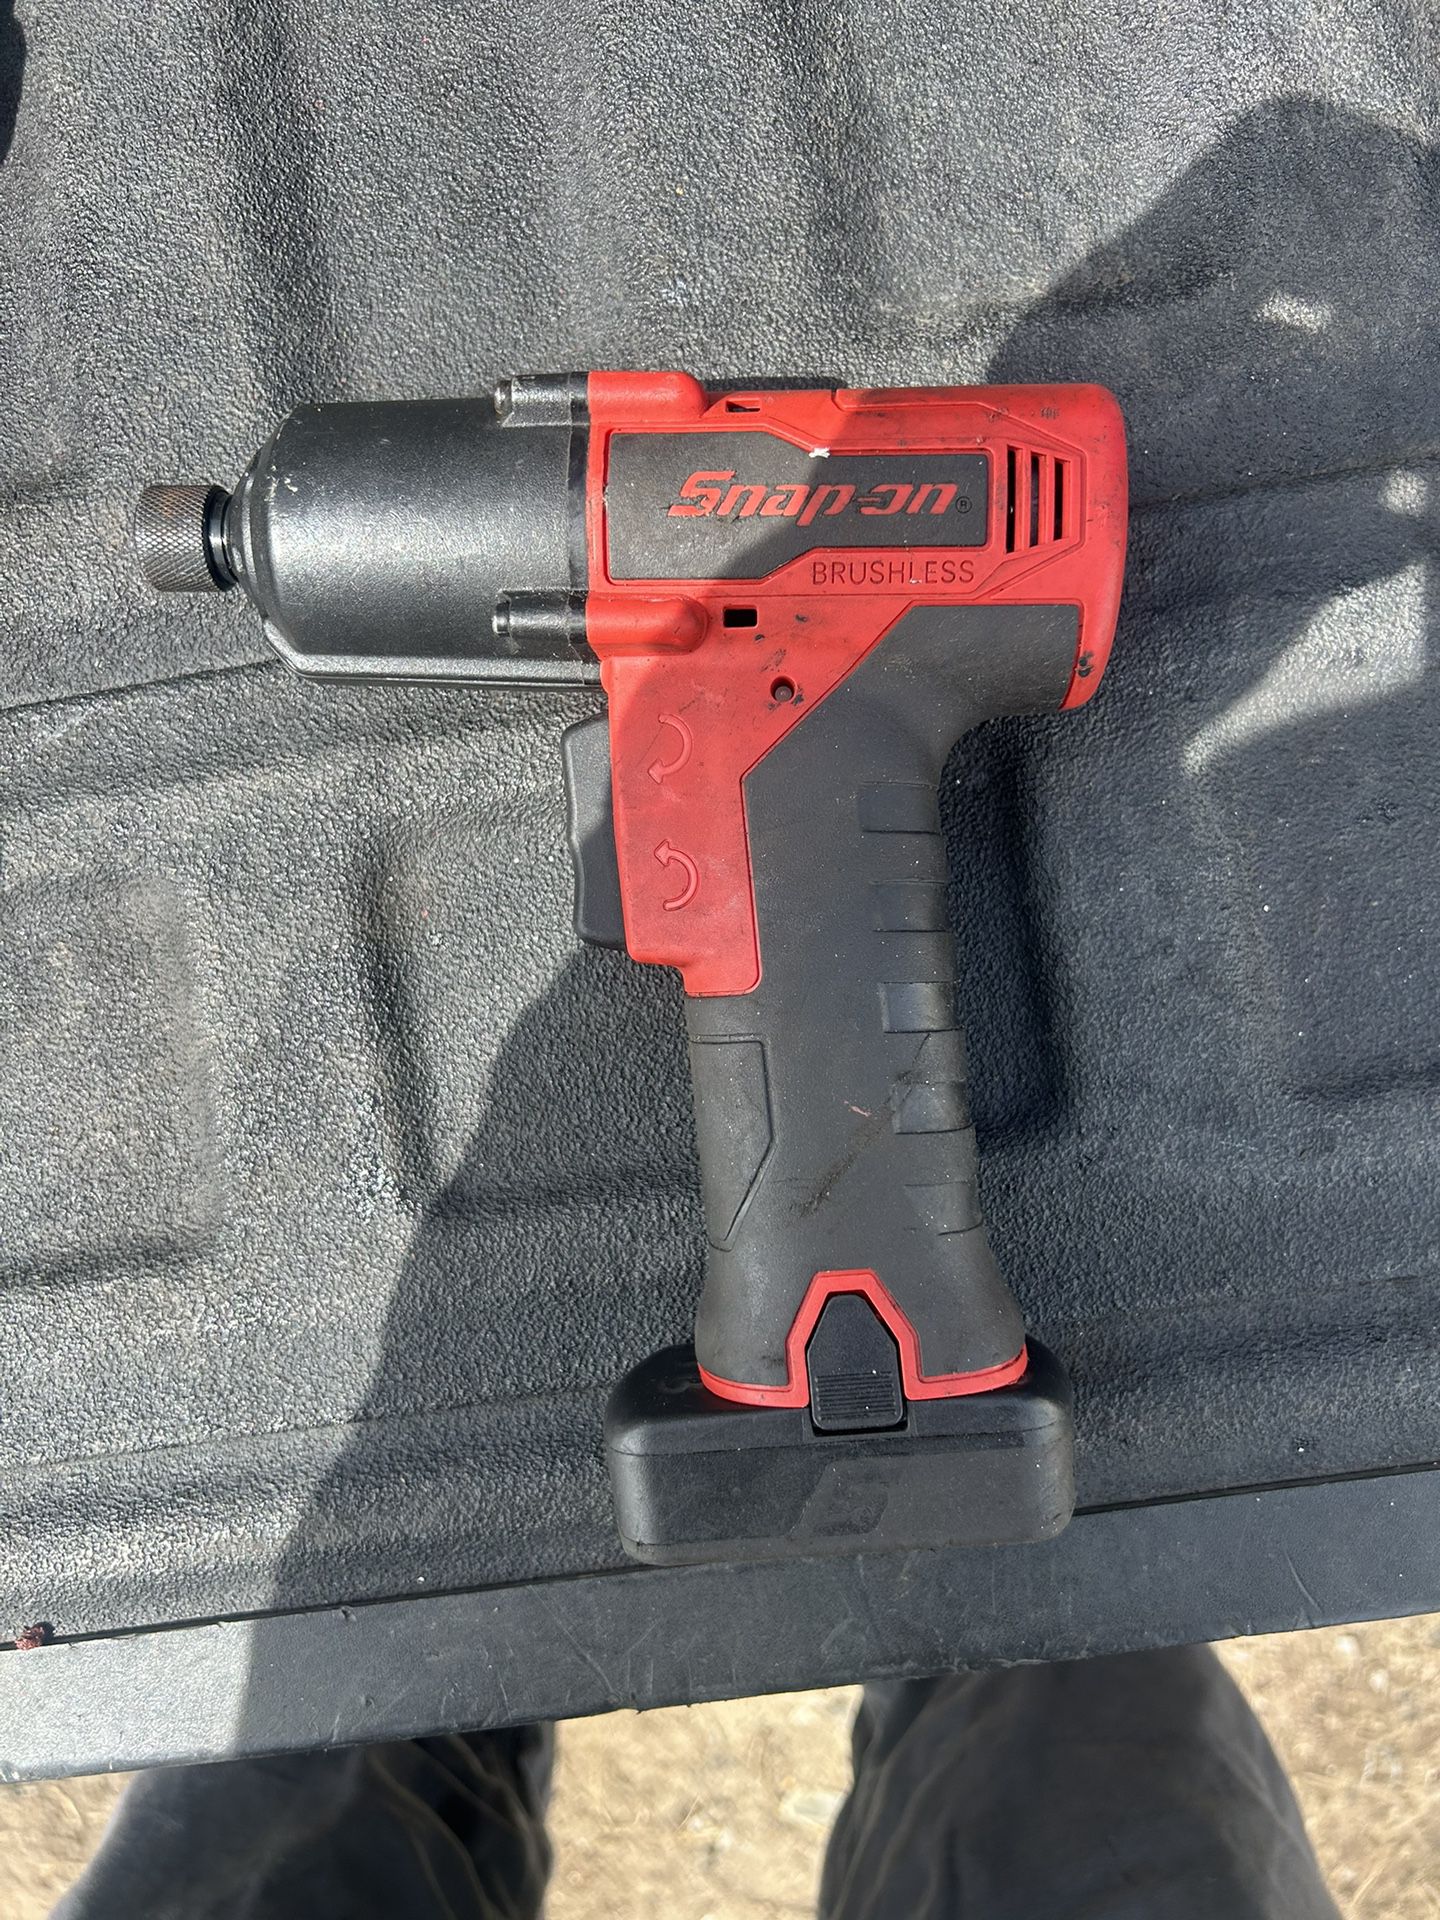 Snap On 14.4v cordless drill with Battery (CTQ861)